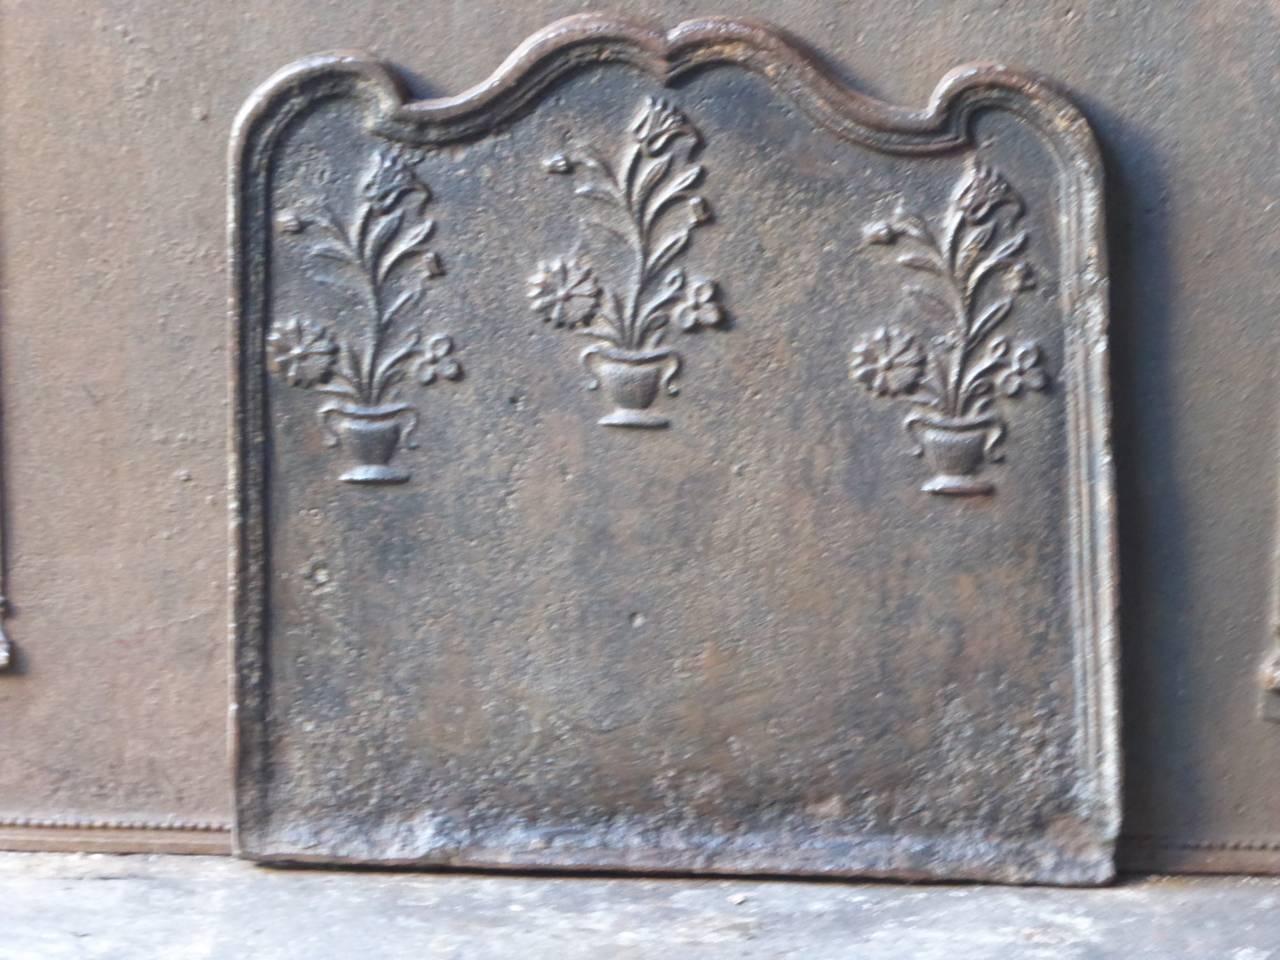 18th century French fireplace fireback with three flower baskets.

We have a unique and specialized collection of antique and used fireplace accessories consisting of more than 1000 listings at 1stdibs. Amongst others, we always have 300+ firebacks,